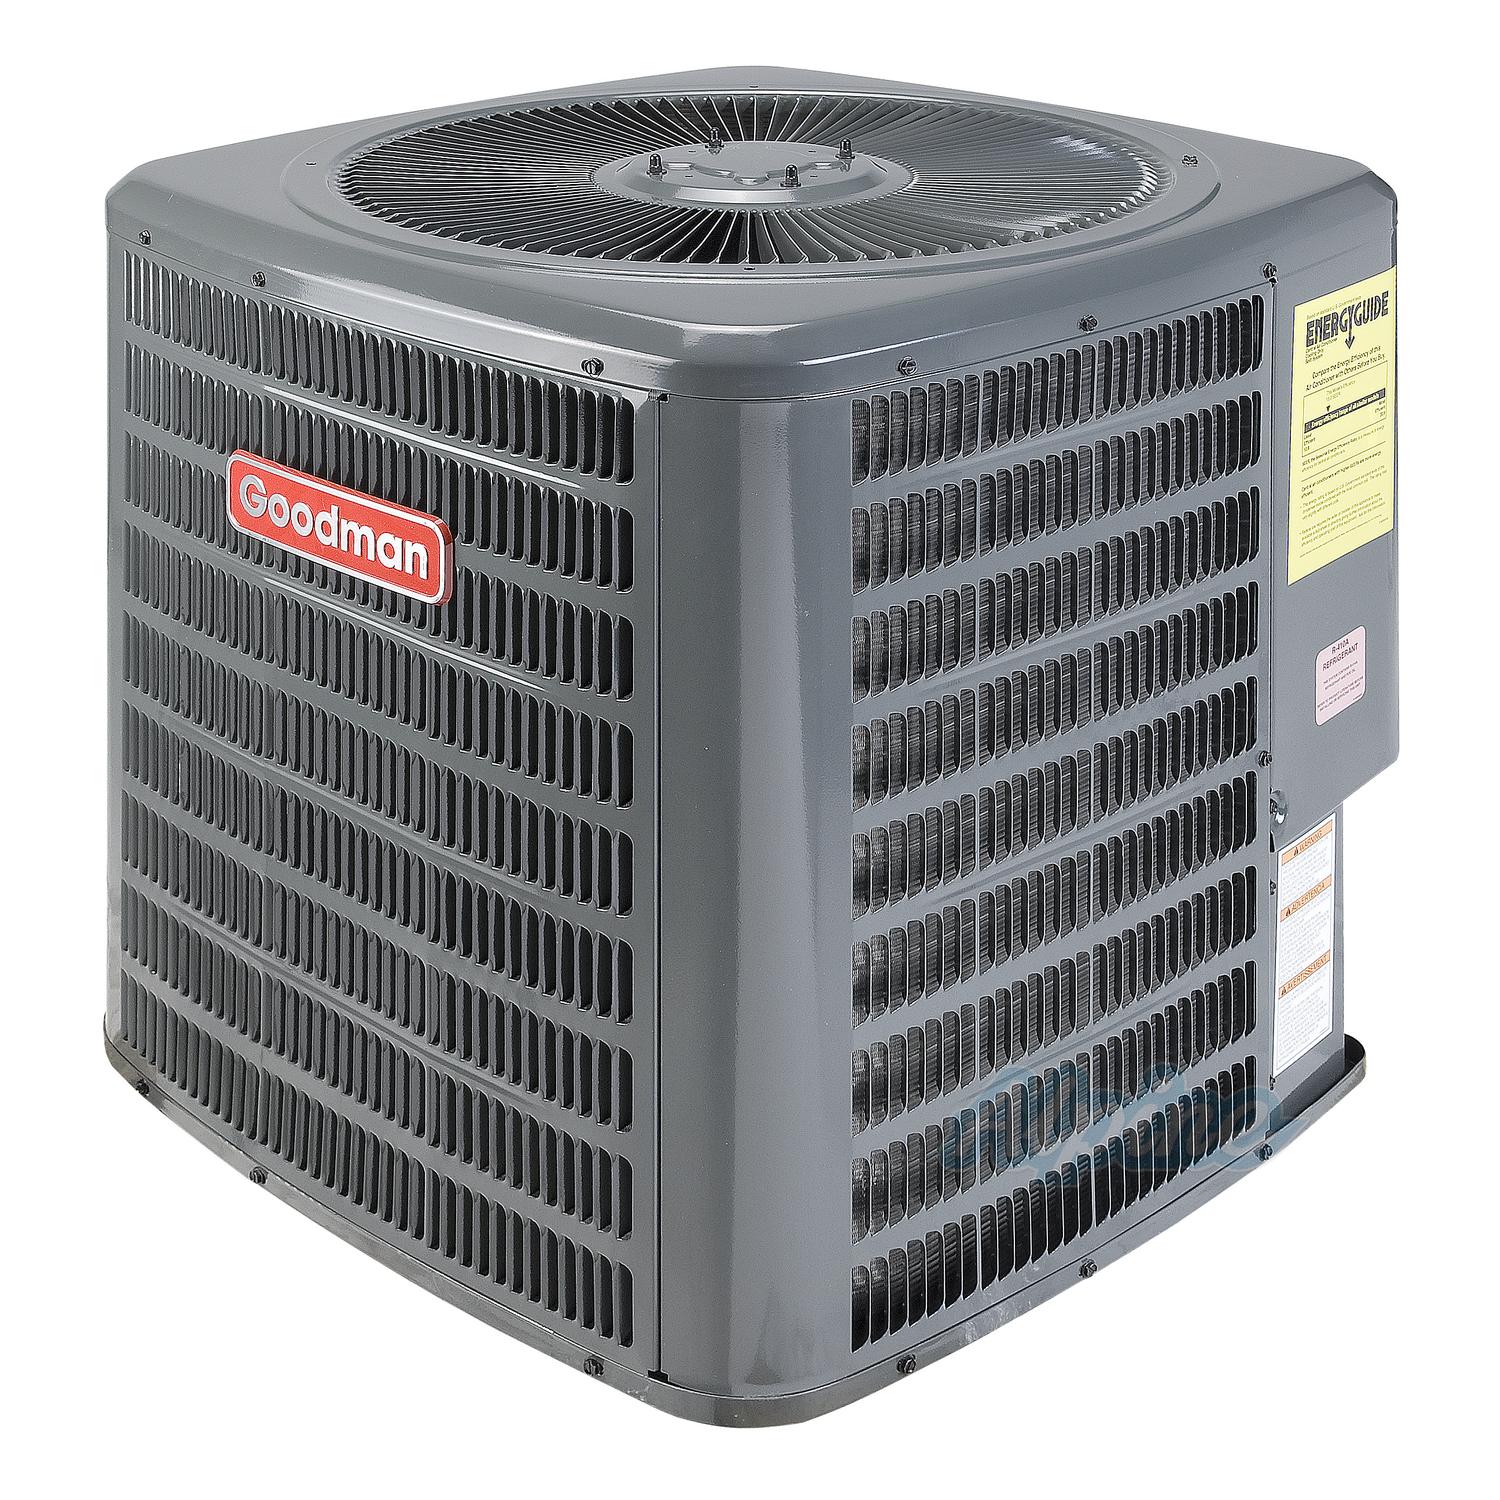 air-conditioners-split-system-goodman-2-5-ton-14-seer-condenser-with